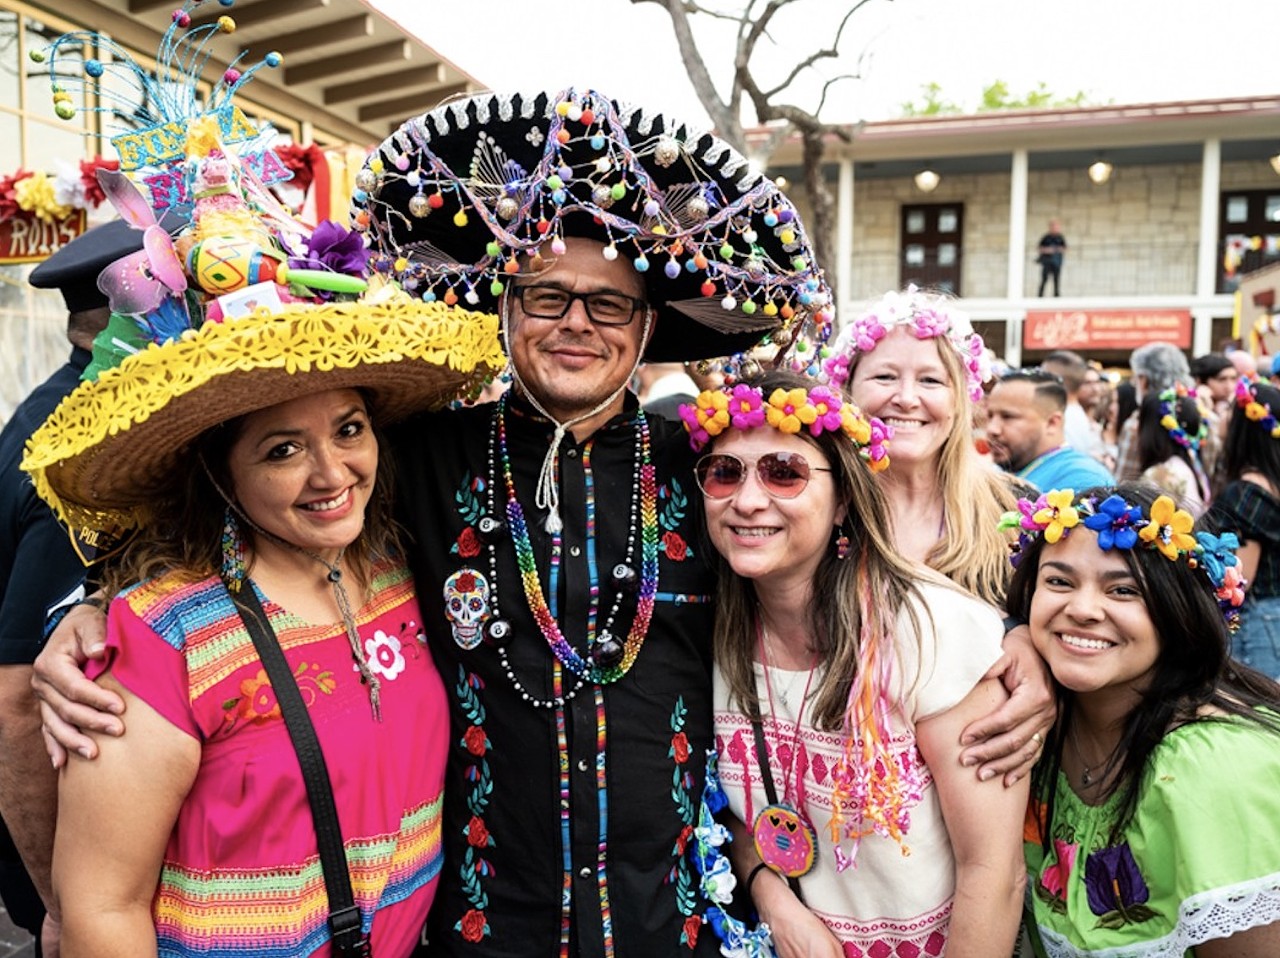 Do Fiesta the right way
You have to attend at least one parade, run into 10 acquaintances you don’t like at Oyster Bake, laugh your ass off at Cornyation, take endless selfies with Fiesta royalty while wearing a flower crown, get drunk at NIOSA and — of course — eat your weight’s worth of chicken-on-a-stick.